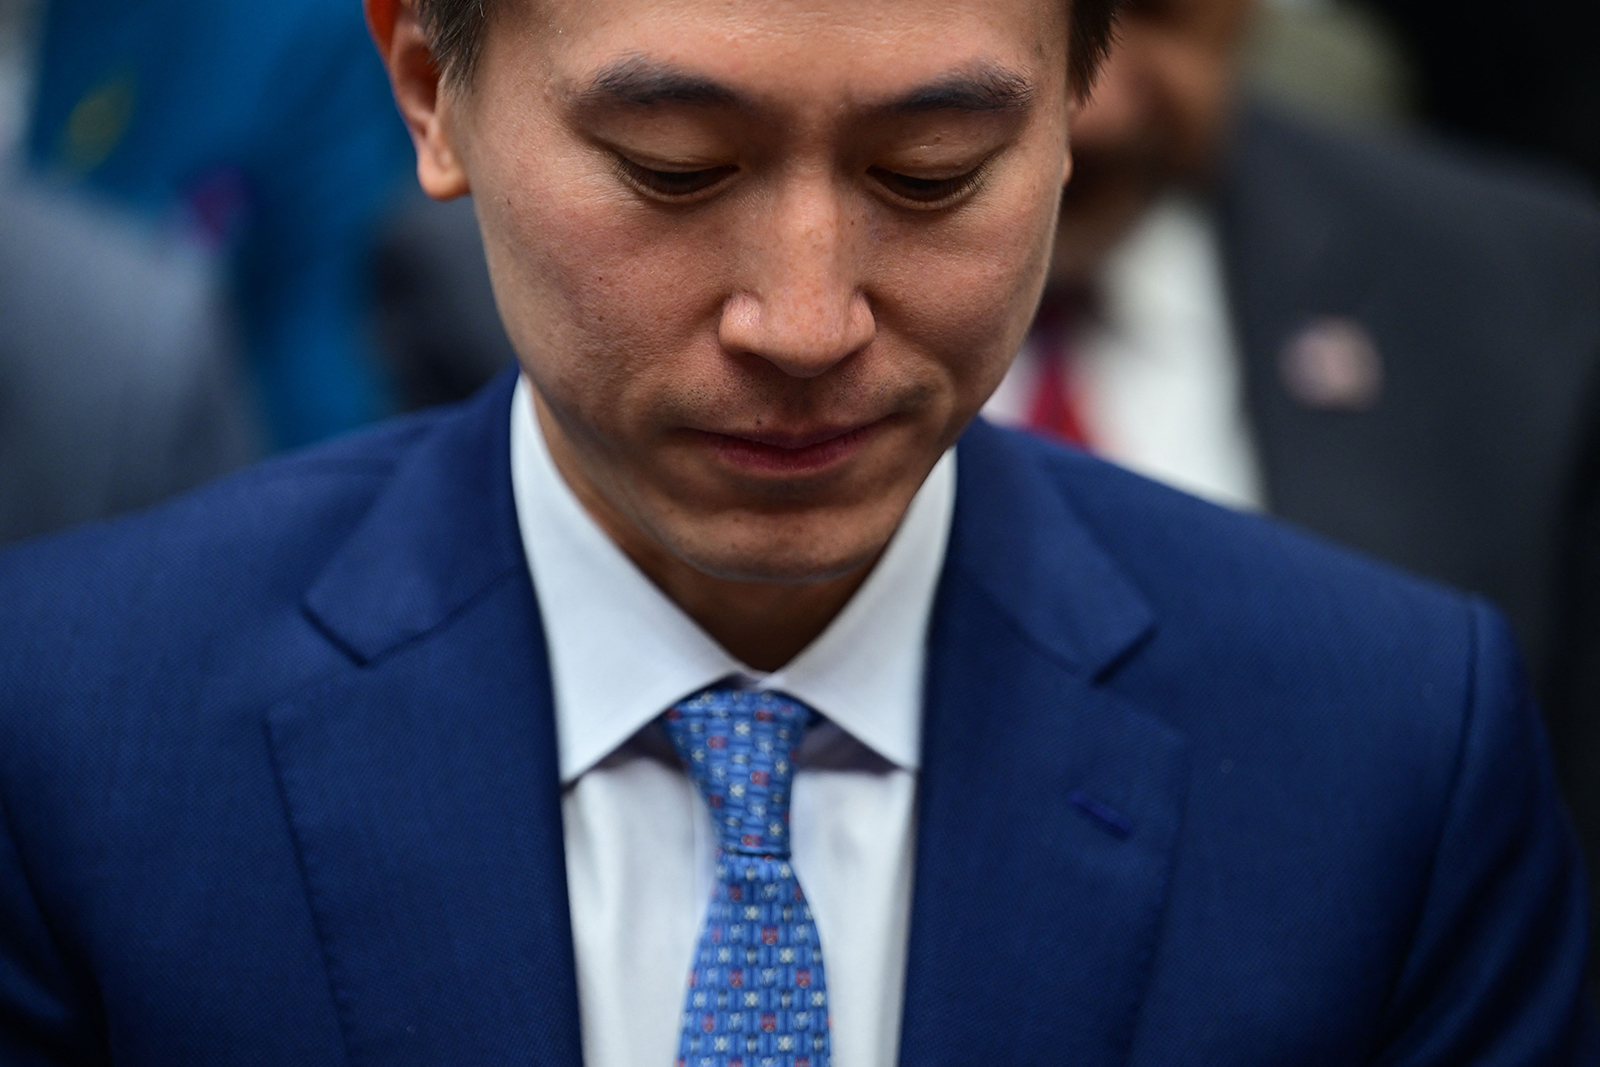 TikTok CEO Shou Zi Chew leaves as the House Energy and Commerce Committee hearing on "TikTok: How Congress Can Safeguard American Data Privacy and Protect Children from Online Harms," calls for a recess on March 23.